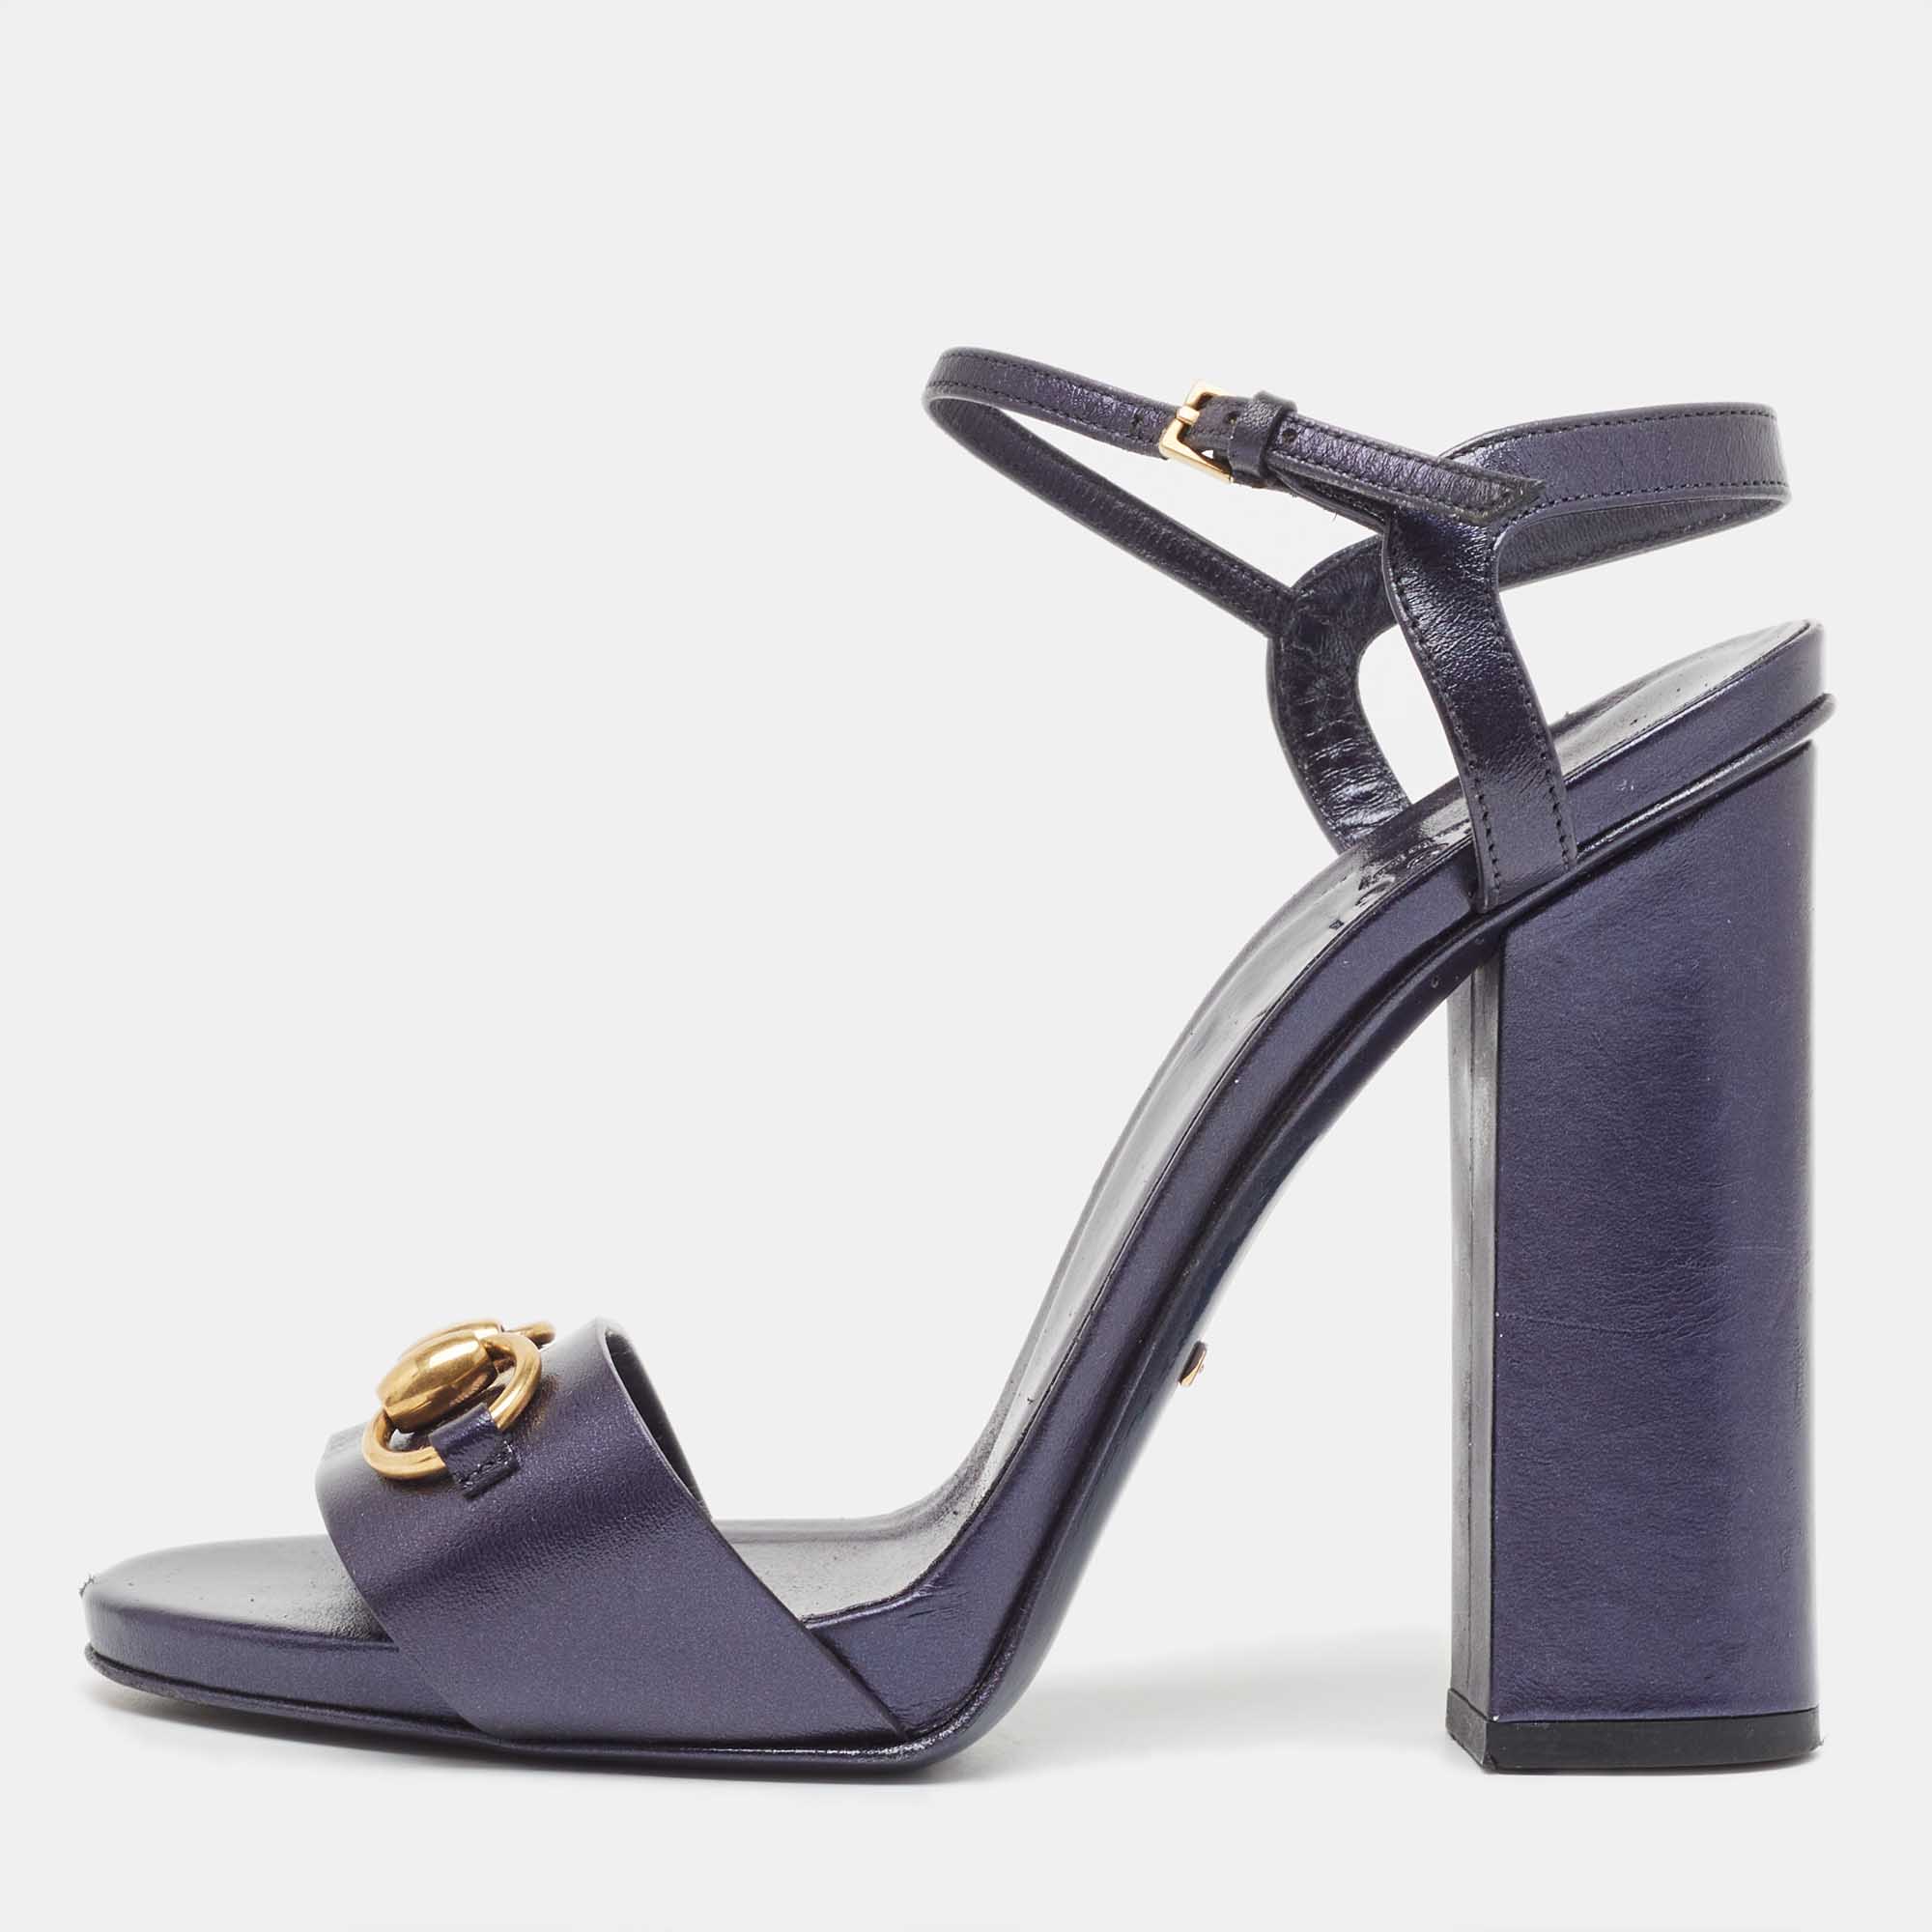 Pre-owned Gucci Metallic Navy Blue Leather Horsebit Ankle Strap Sandals Size 38